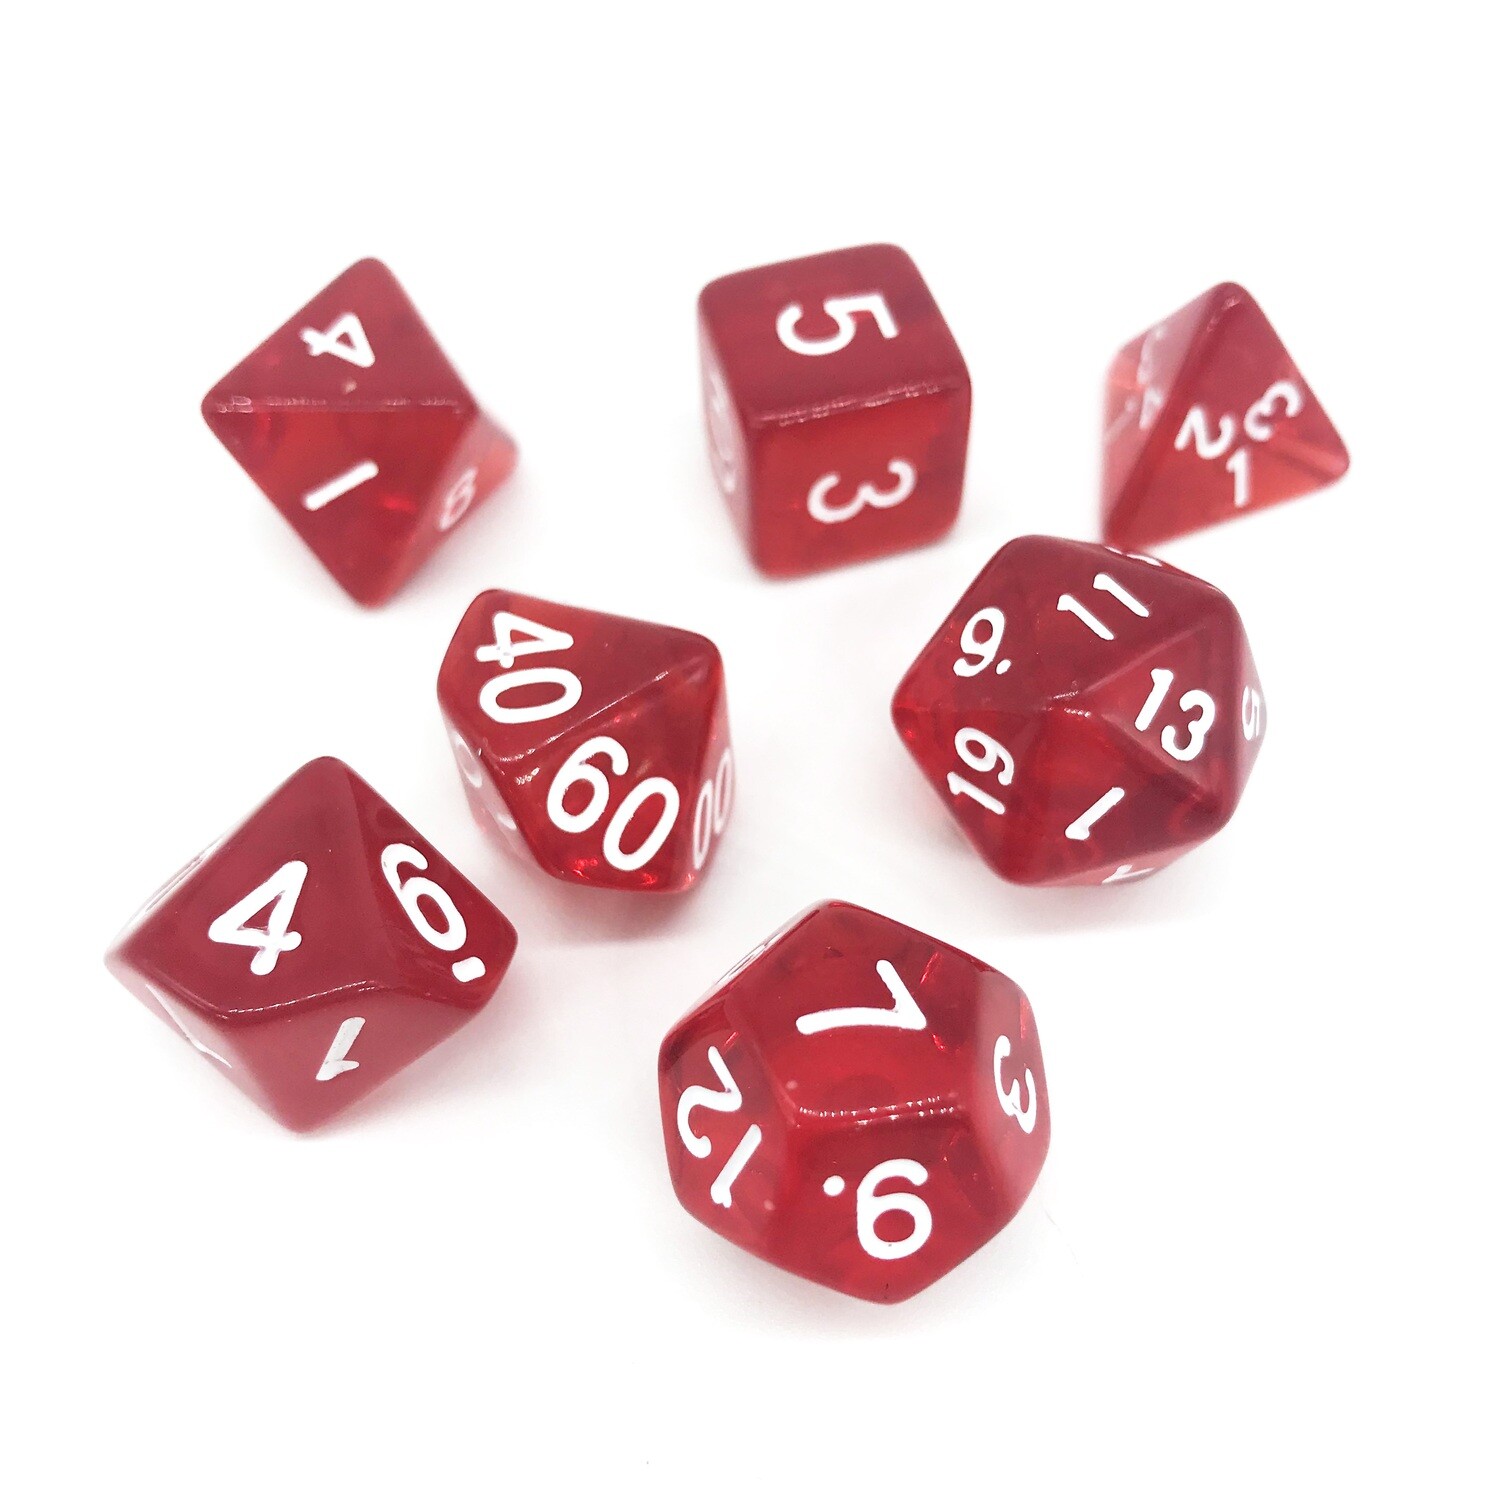 Dice Set - Red transparent with white numbers